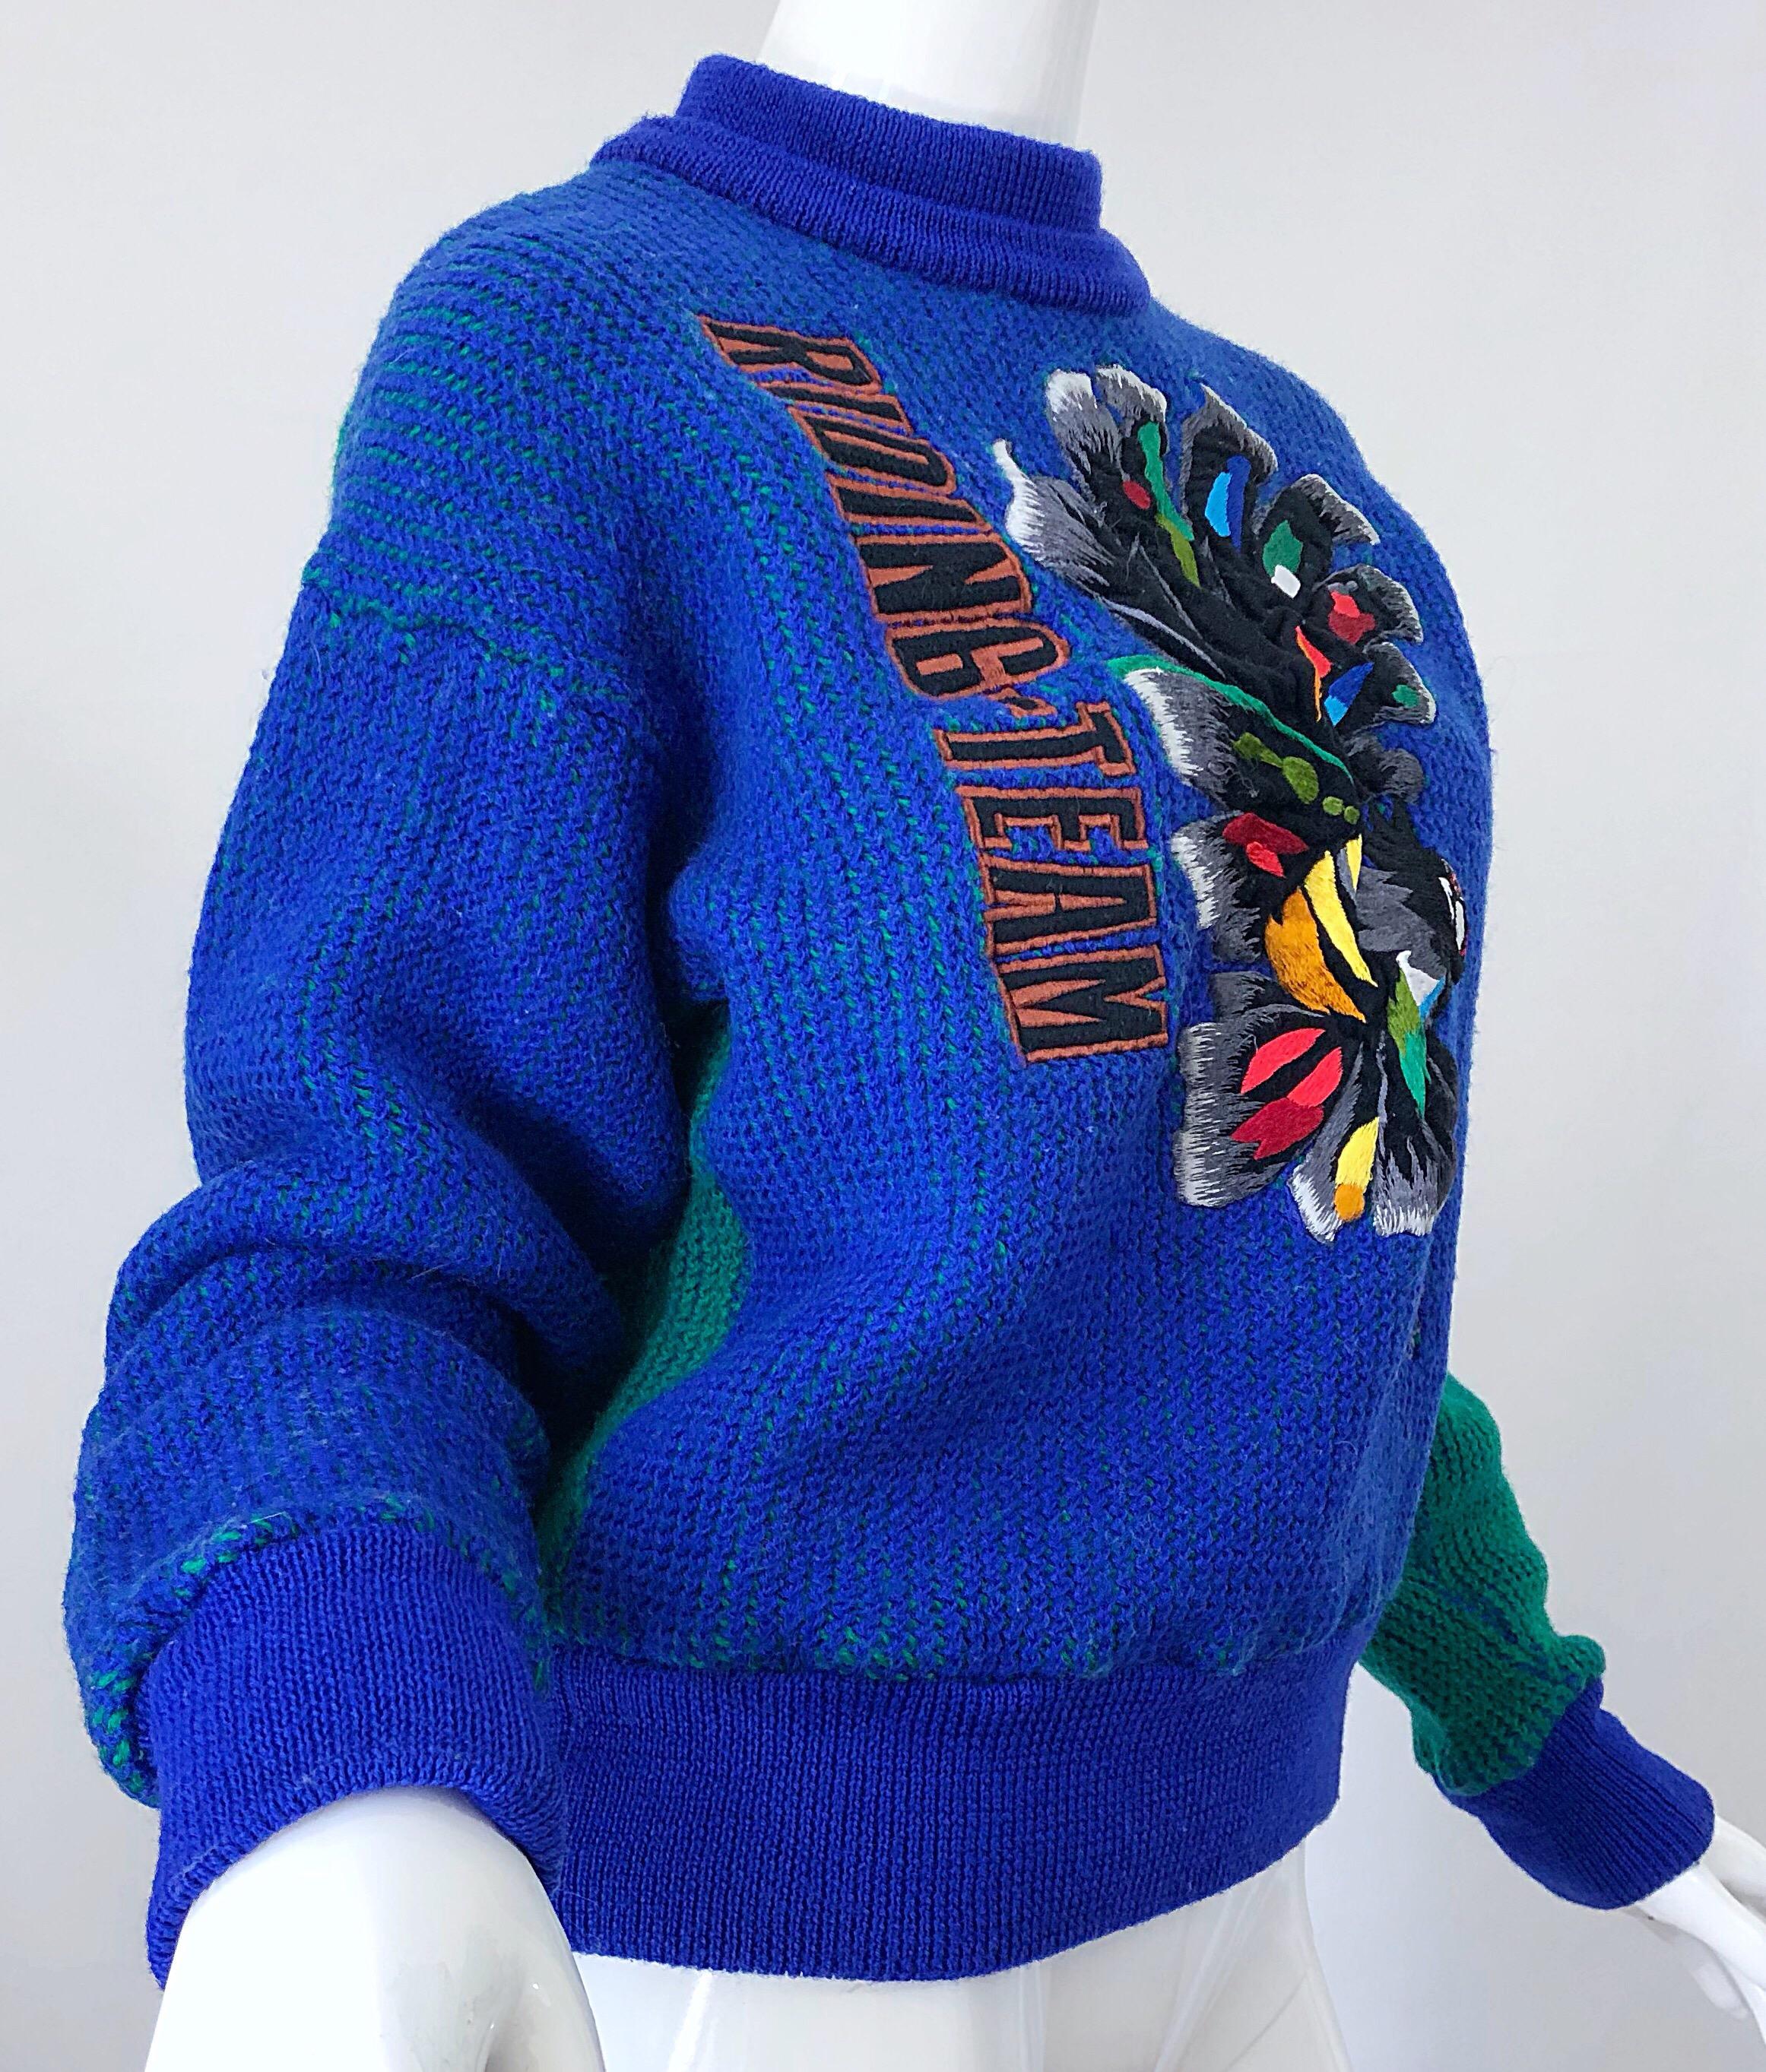 Women's or Men's Kansai Yamamoto 1980s Riding Team Royal Blue Embroidered Novelty Wool Sweater For Sale